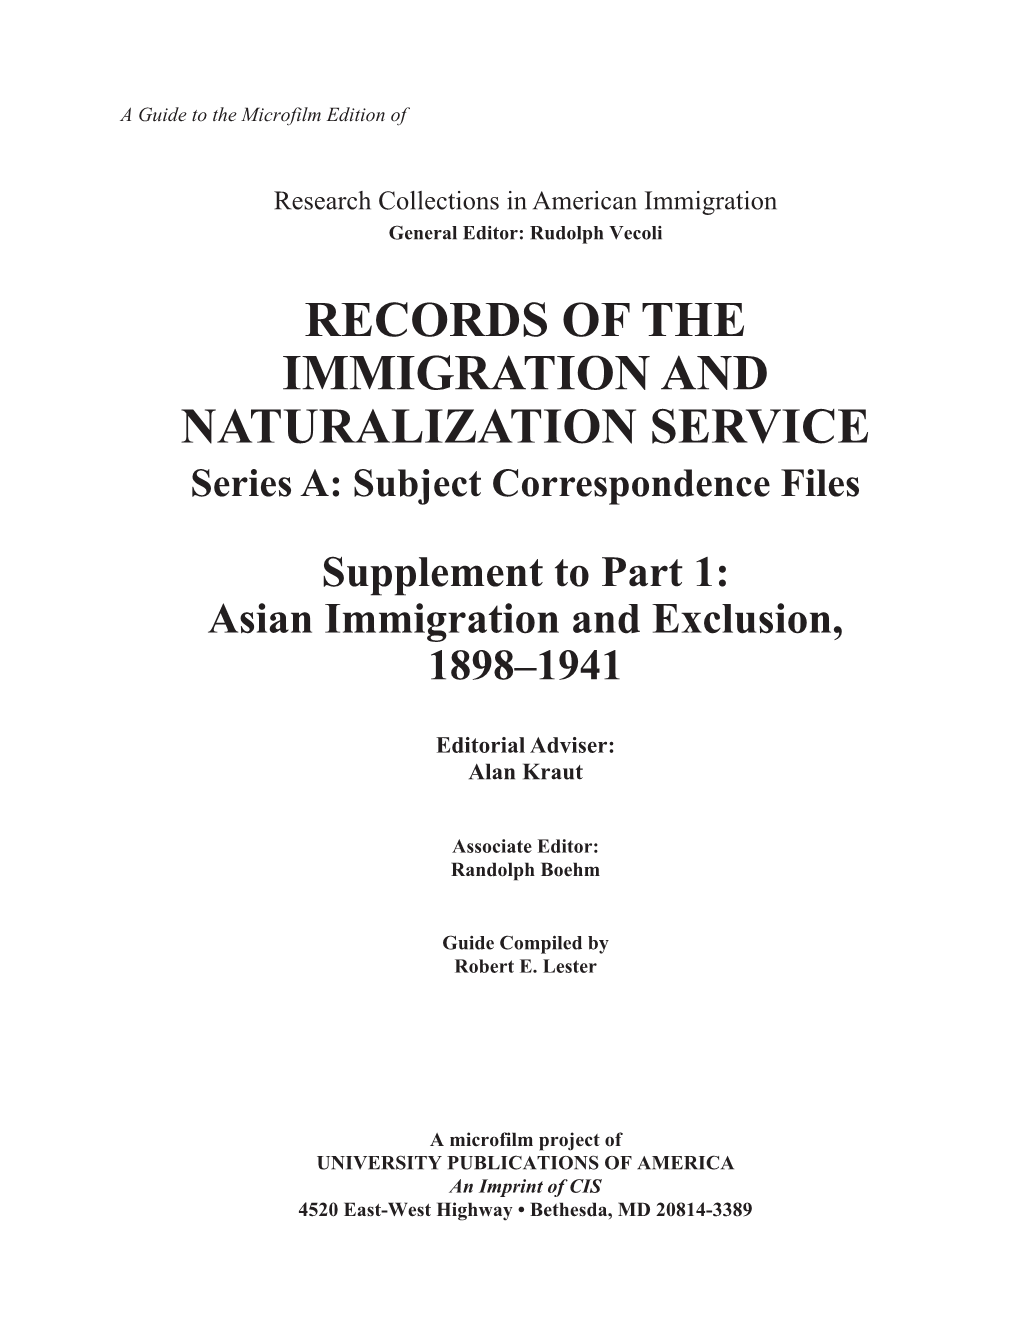 RECORDS of the IMMIGRATION and NATURALIZATION SERVICE Series A: Subject Correspondence Files